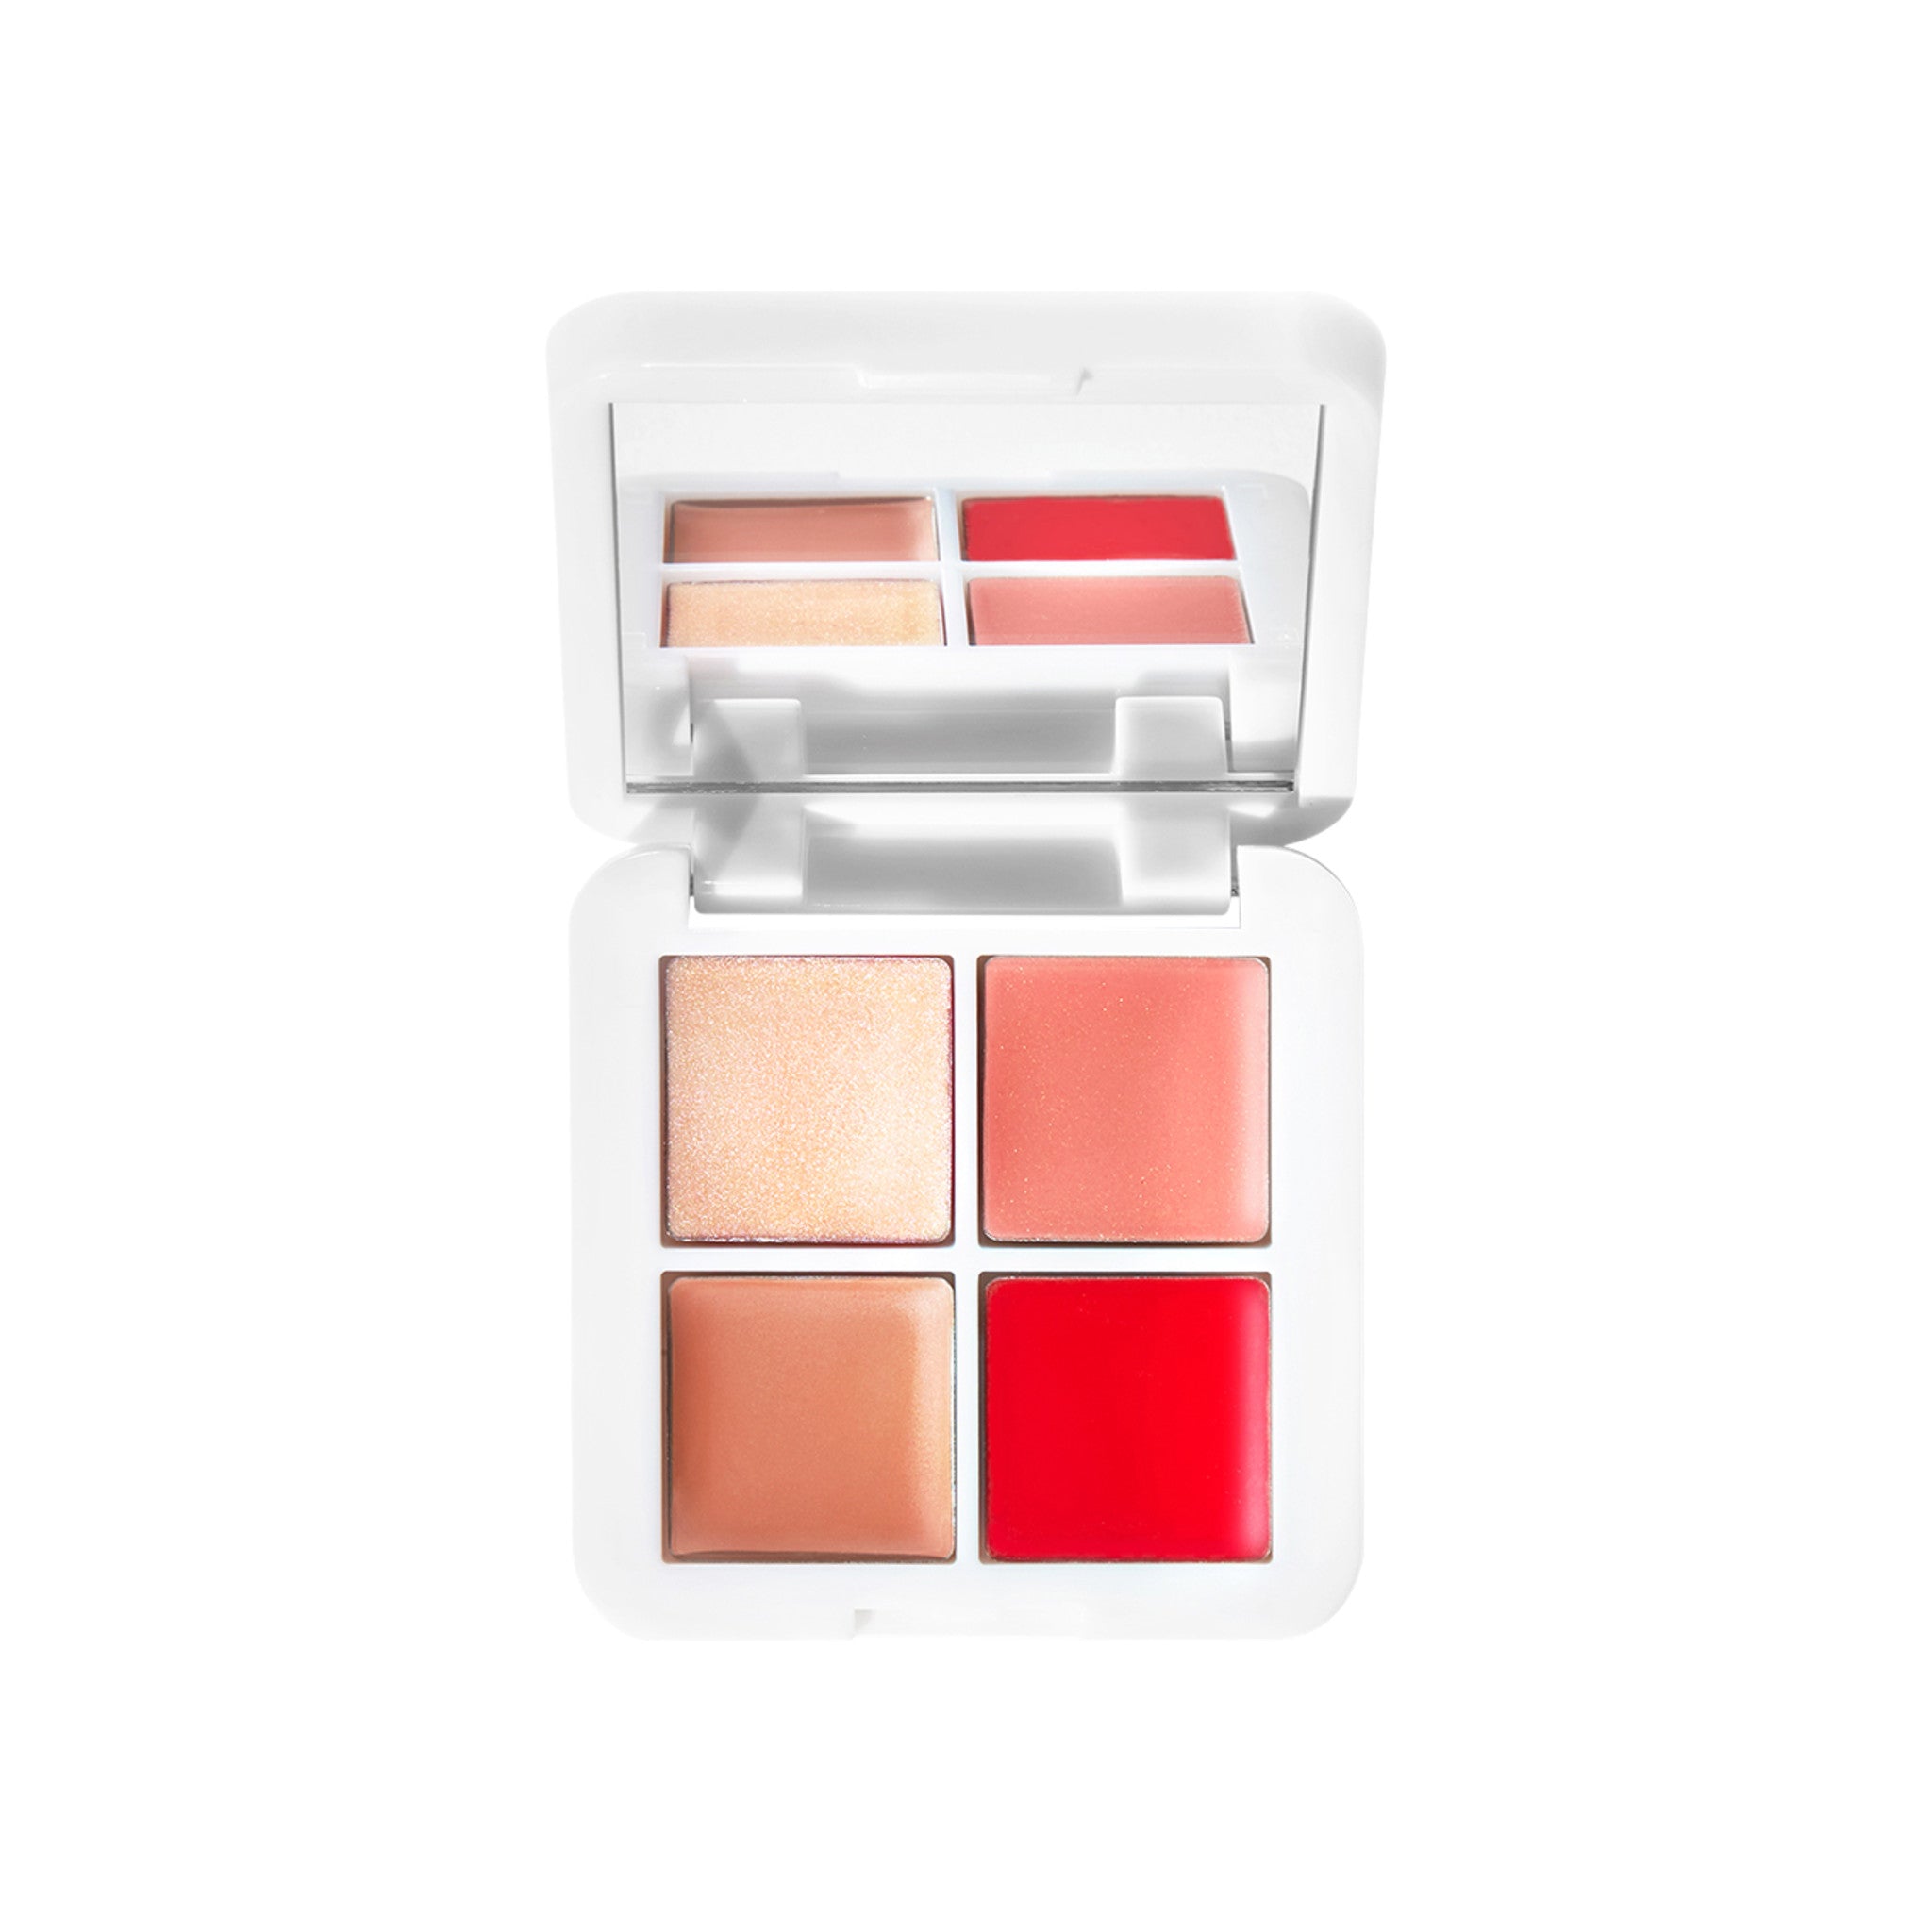 RMS Beauty lip2cheek glow quad main image. This product is in the color multi